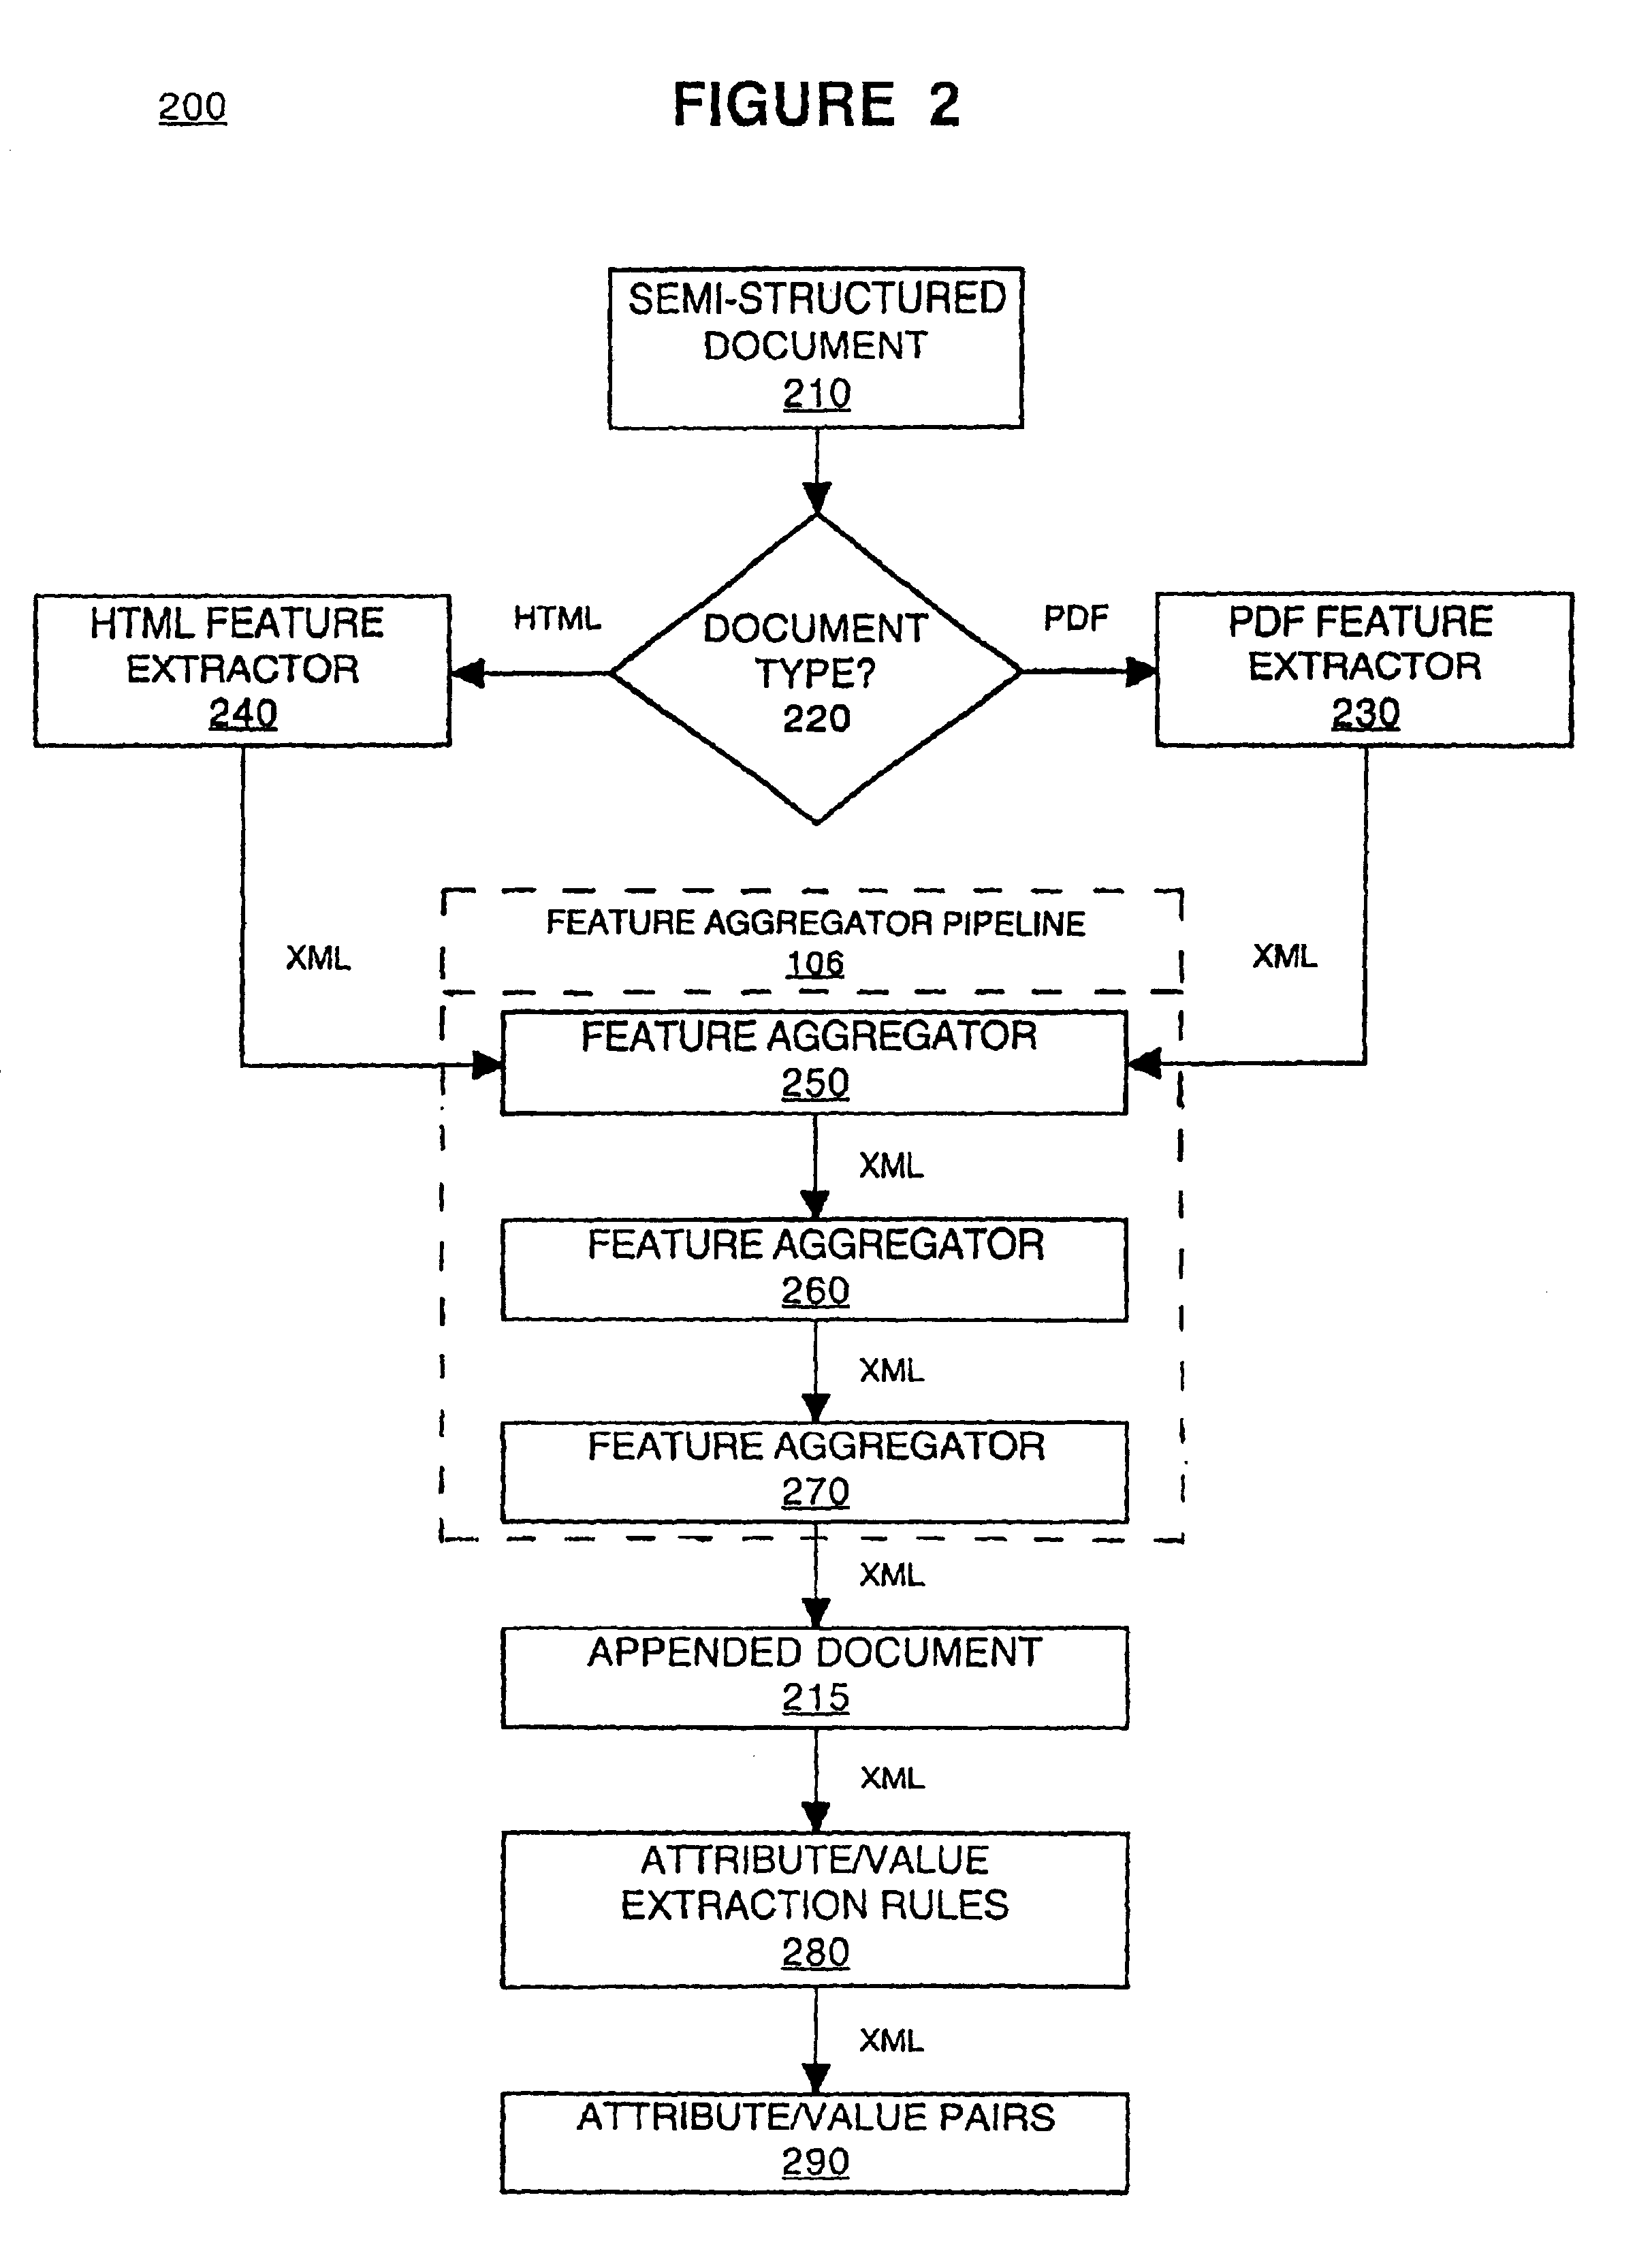 Method for content mining of semi-structured documents